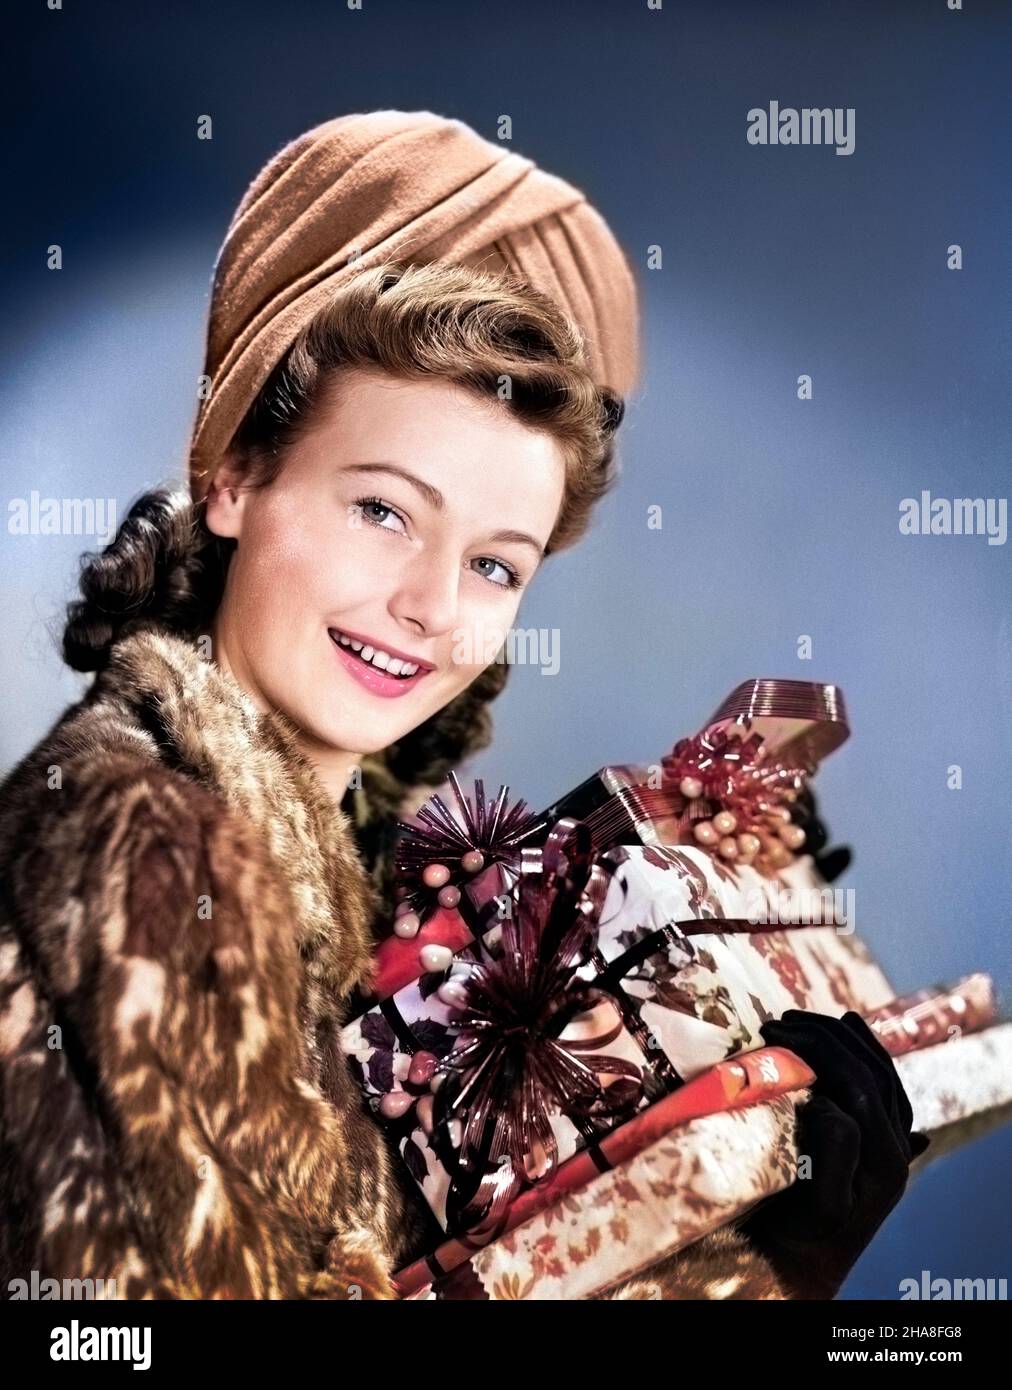 1940s WOMAN IN FAUX FUR COAT LOOKING AT CAMERA HOLDING STACK OF FESTIVELY WRAPPED CHRISTMAS PRESENTS - x509c HAR001 HARS STYLE EVE YOUNG ADULT PEACE PLEASED JOY LIFESTYLE CELEBRATION FEMALES PORTRAITS GROWNUP LADIES PERSONS GROWN-UP PACKAGE EXPRESSIONS WINTERTIME WINTER SEASON HEAD AND SHOULDERS CHEERFUL MERRY HOLIDAYS SEASONS SMILES DECEMBER HOLIDAY CHRISTMAS UPDO DECEMBER 25 VICTORY ROLLS JOYFUL PELT PELTS STYLISH TURBAN JOYOUS PACKAGES SEASON YOUNG ADULT WOMAN CAUCASIAN ETHNICITY CHRISTMAS EVE HAIR STYLE HAR001 OLD FASHIONED Stock Photo